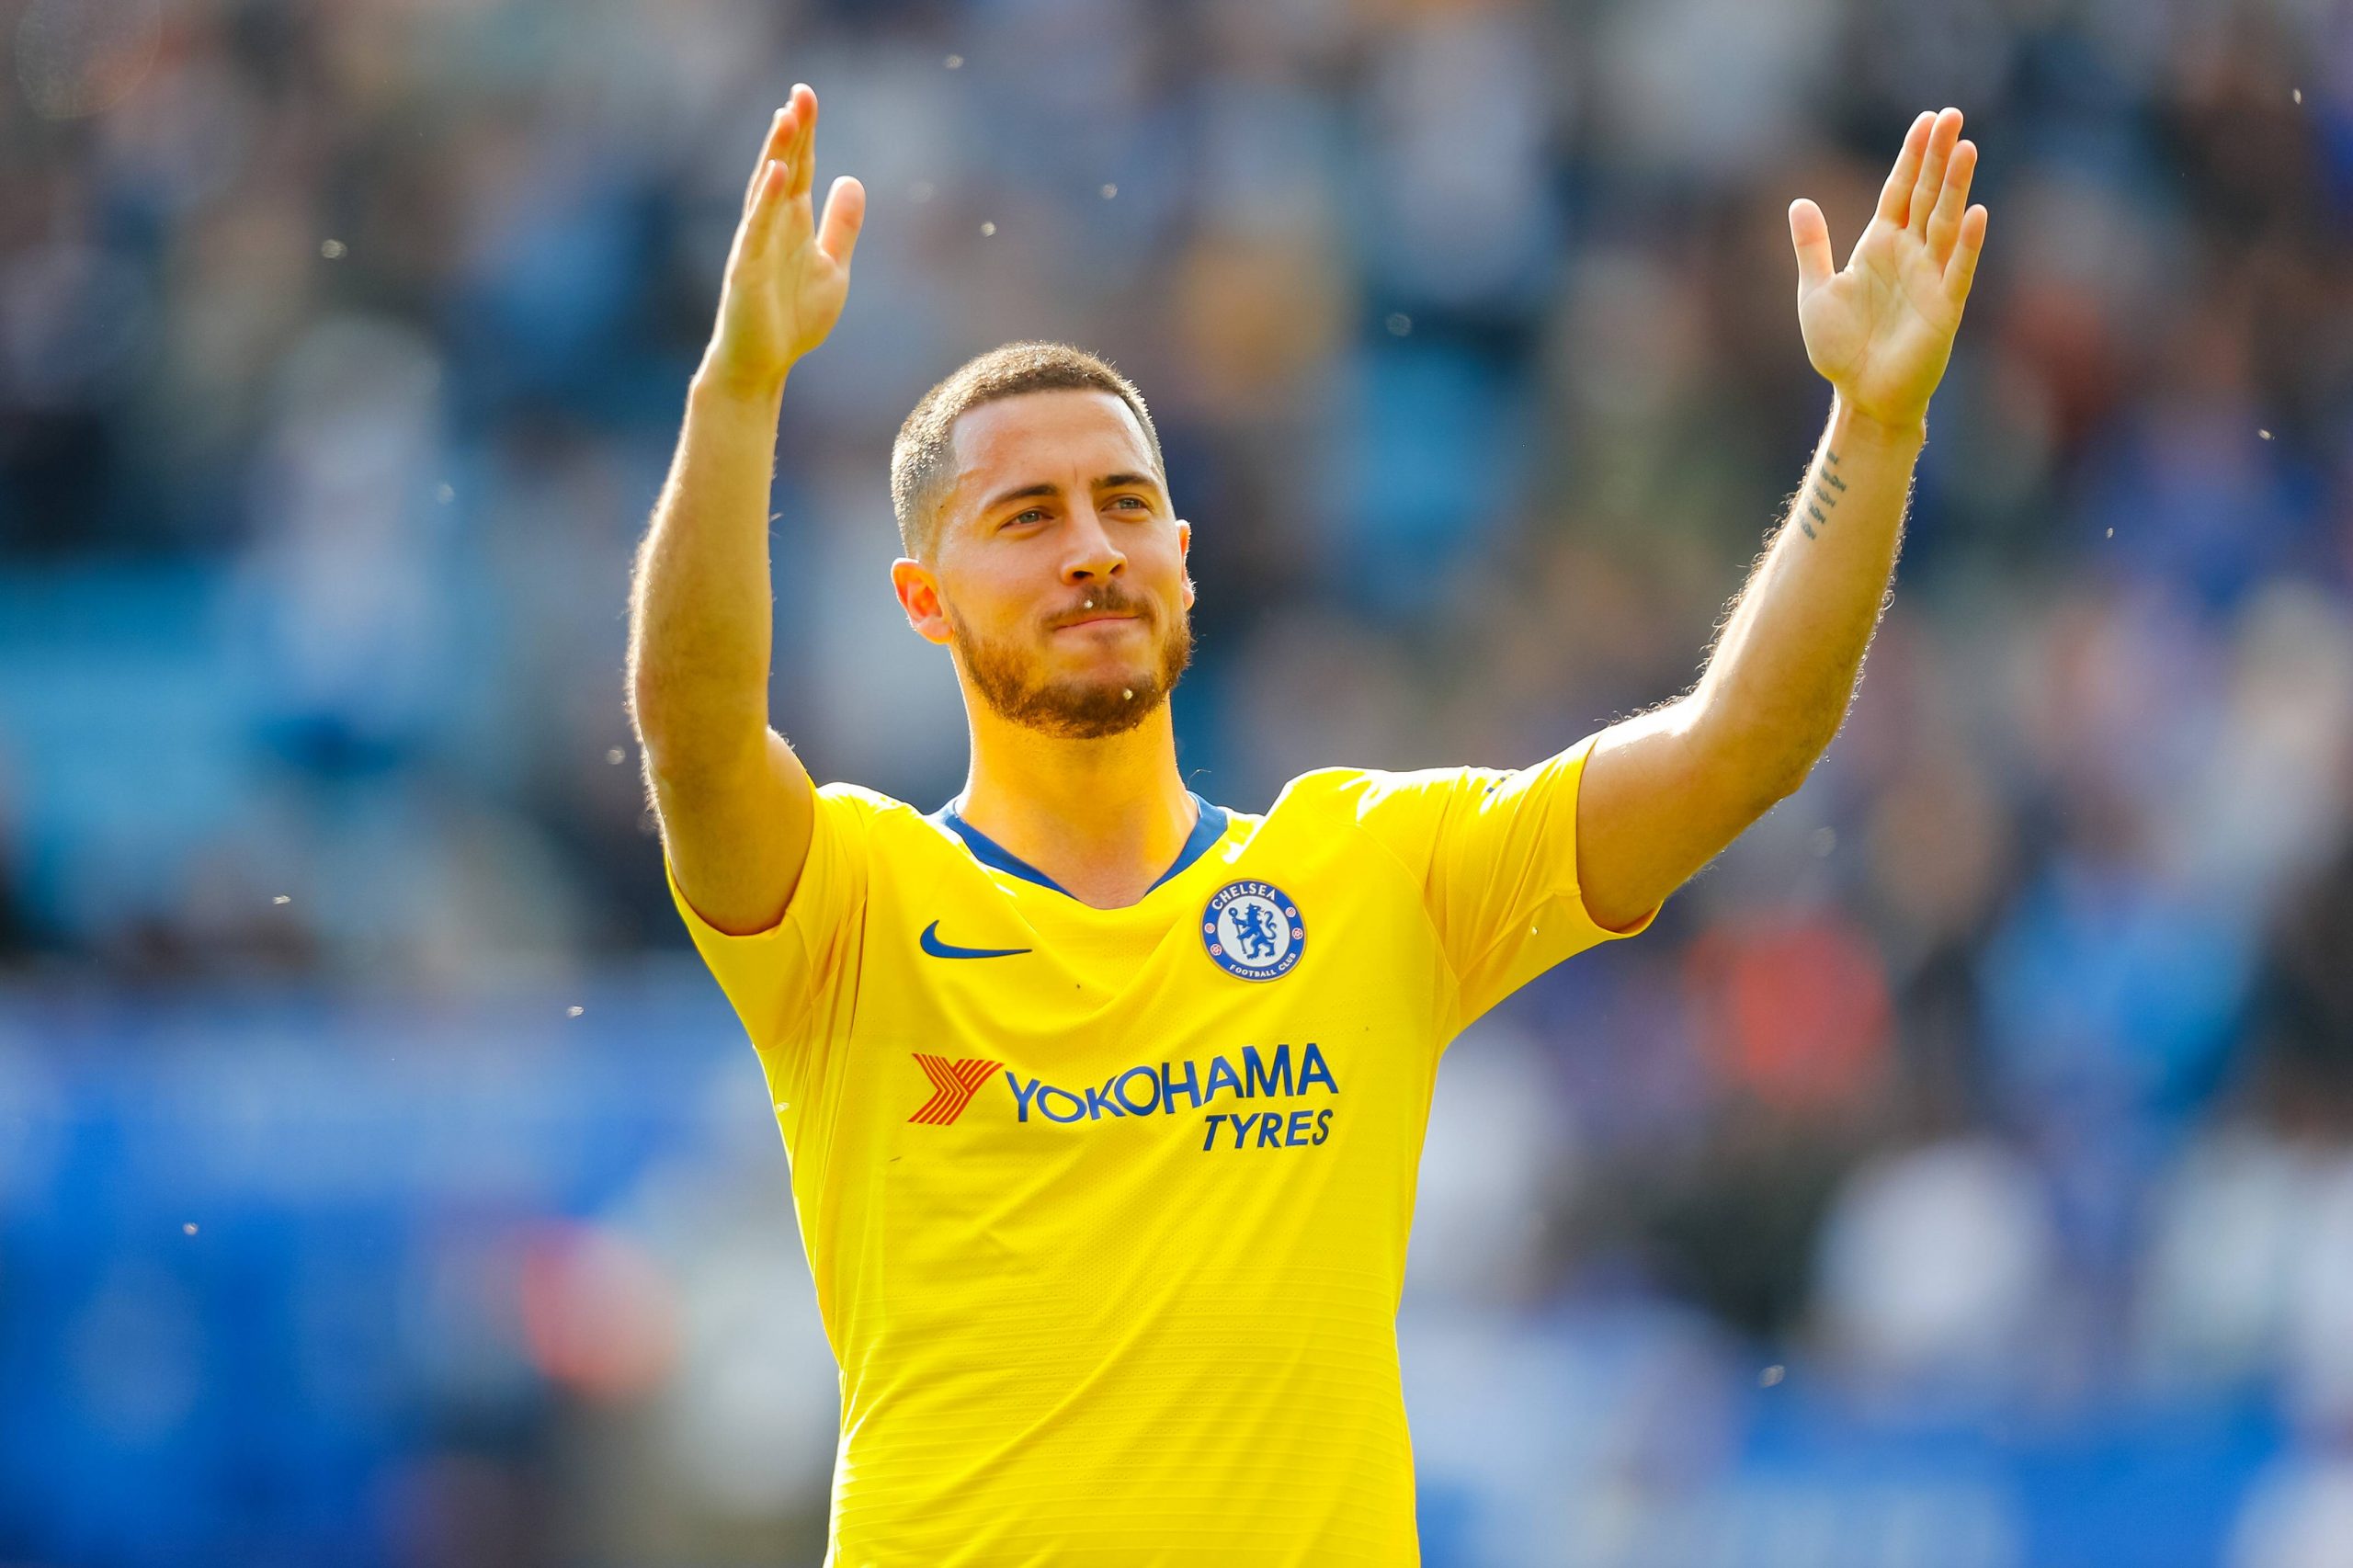 Eden Hazard continues his love affair with Chelsea, this time at expense of Tottenham